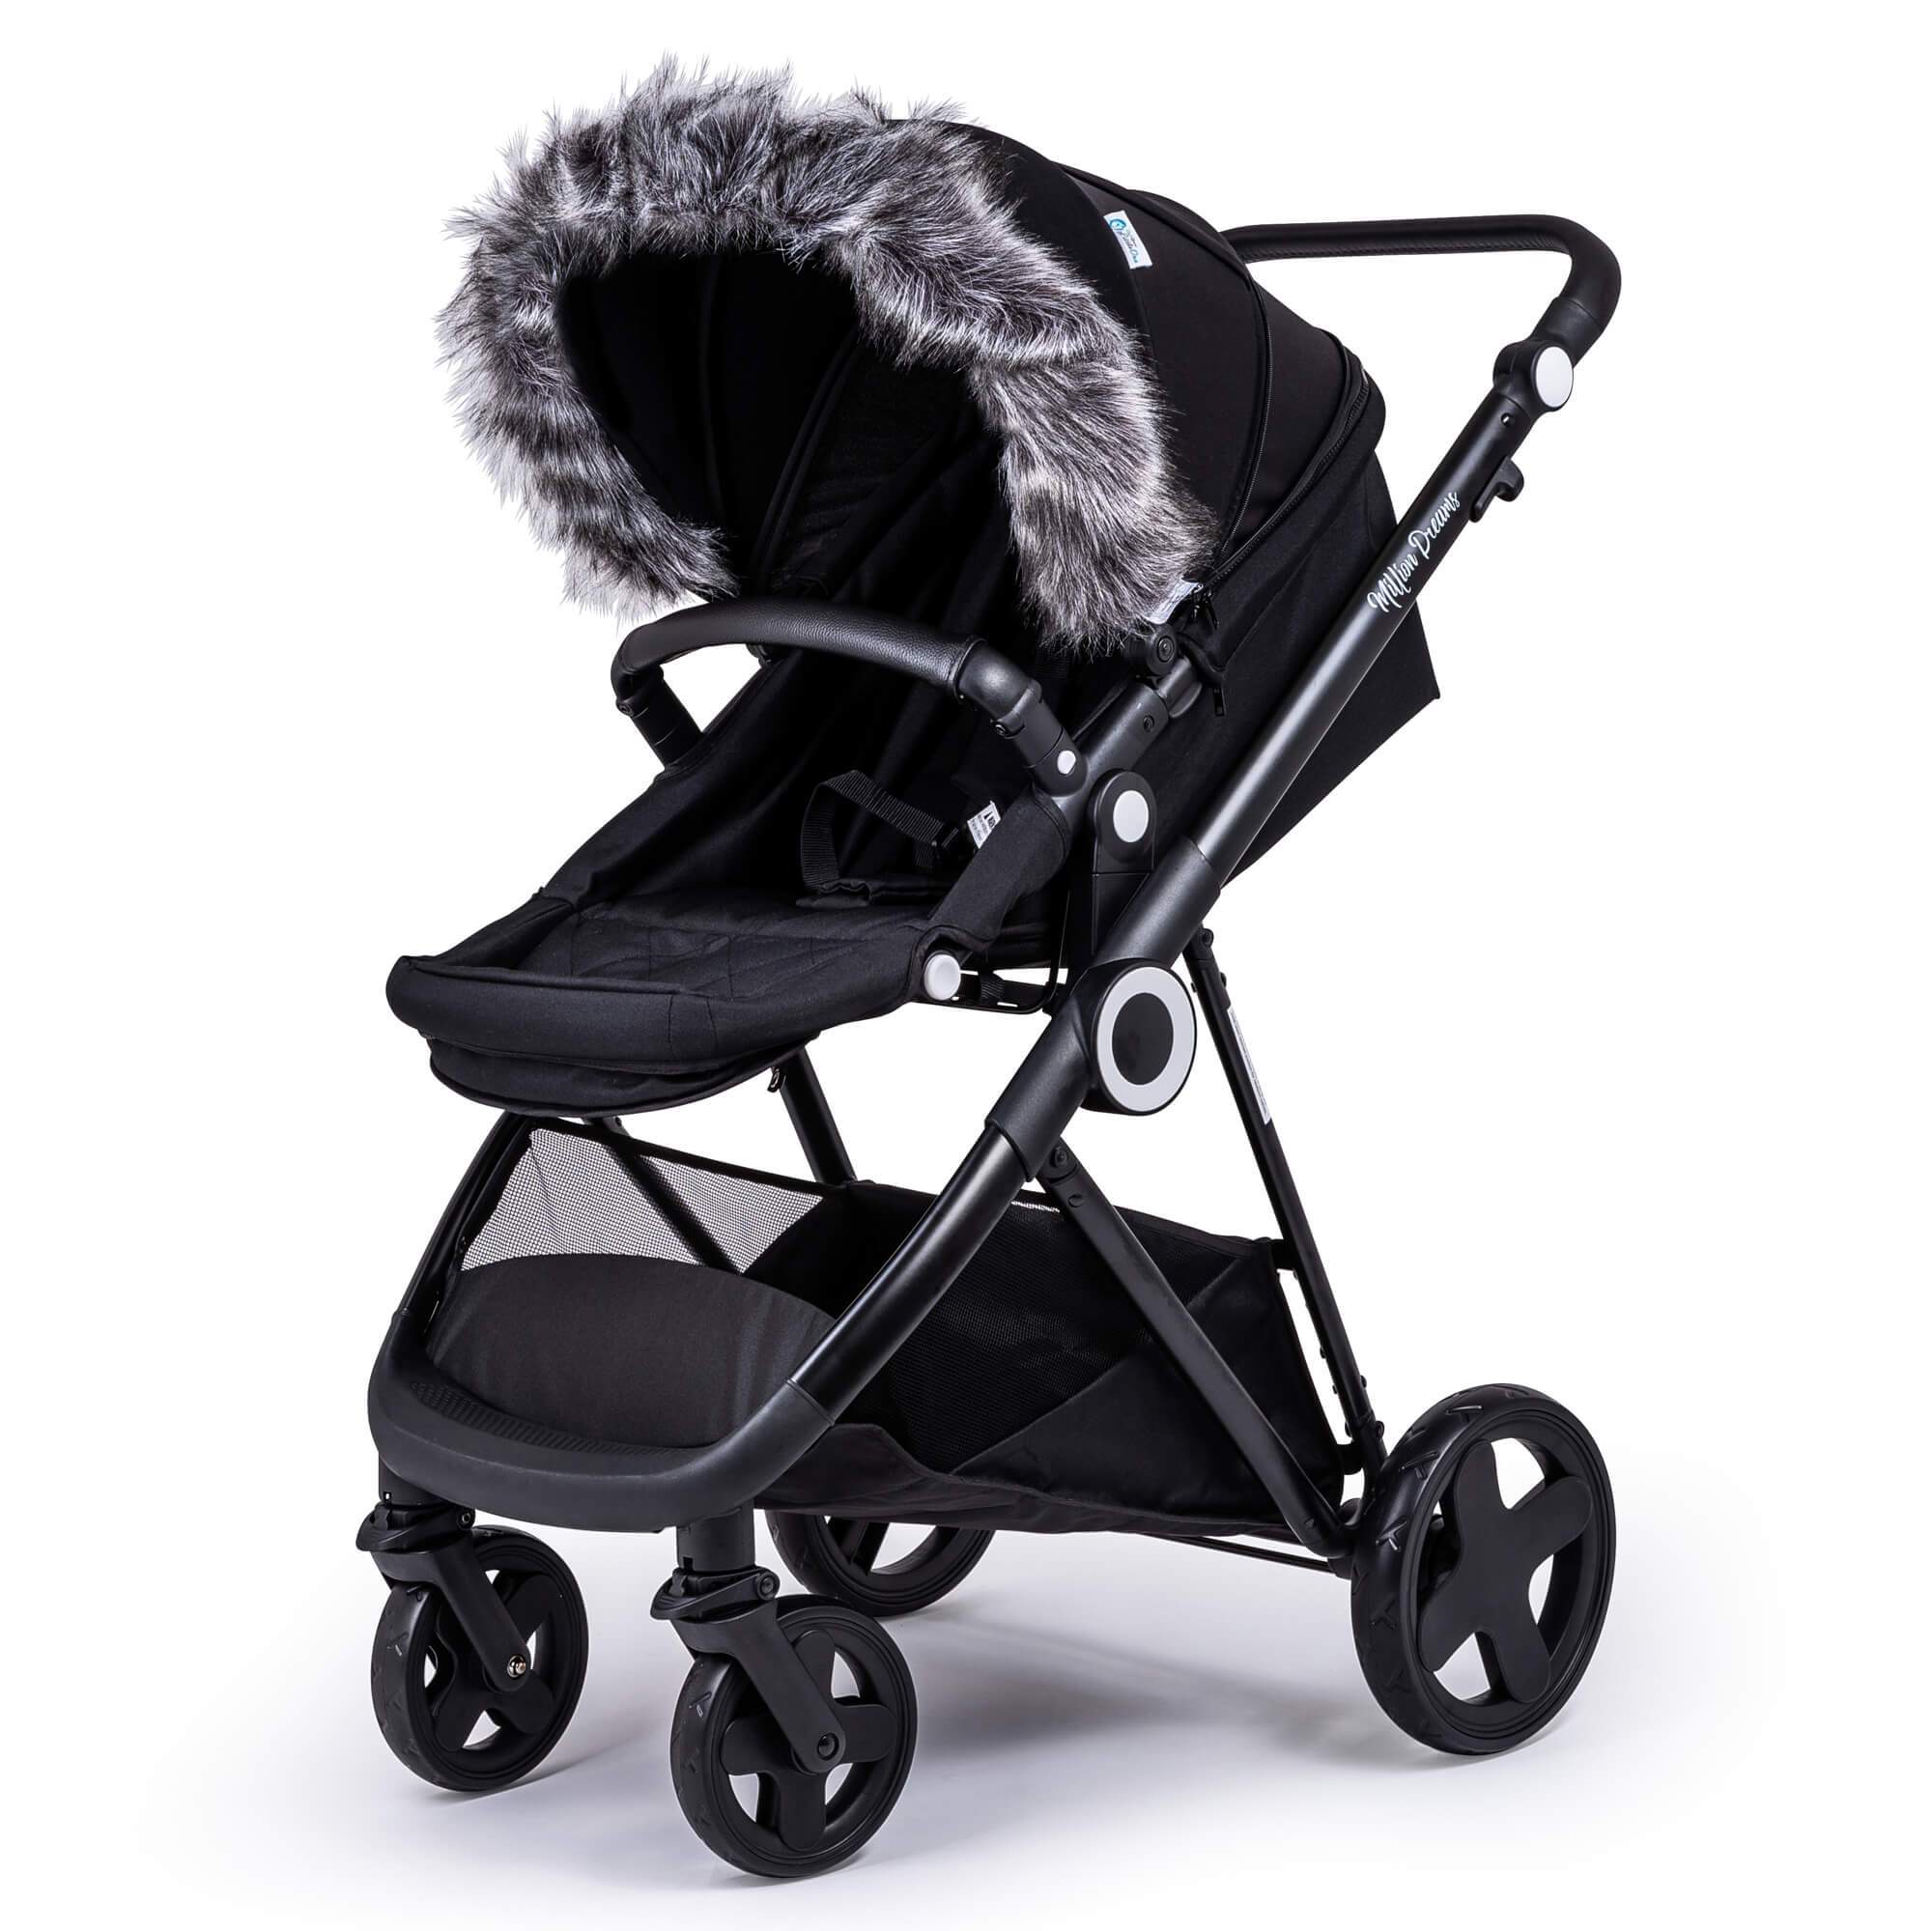 Pram Fur Hood Trim Attachment for Pushchair Compatible with Cosatto - Dark Grey / Fits All Models | For Your Little One